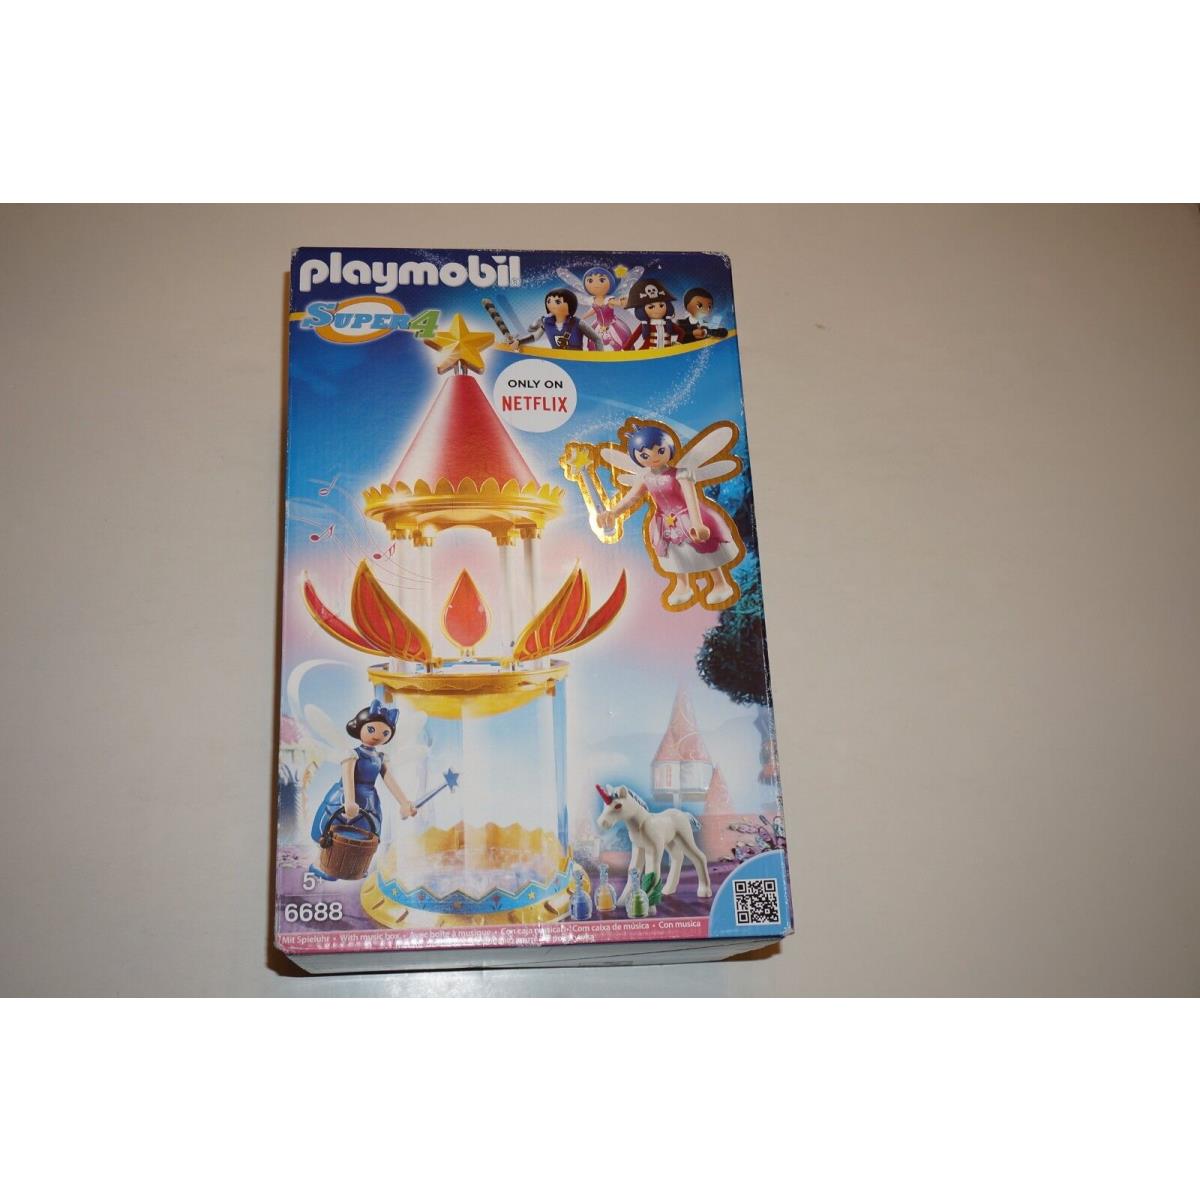 Playmobil Super 4 Musical Flower Tower with Twinkle Building Kit 6688 45pc